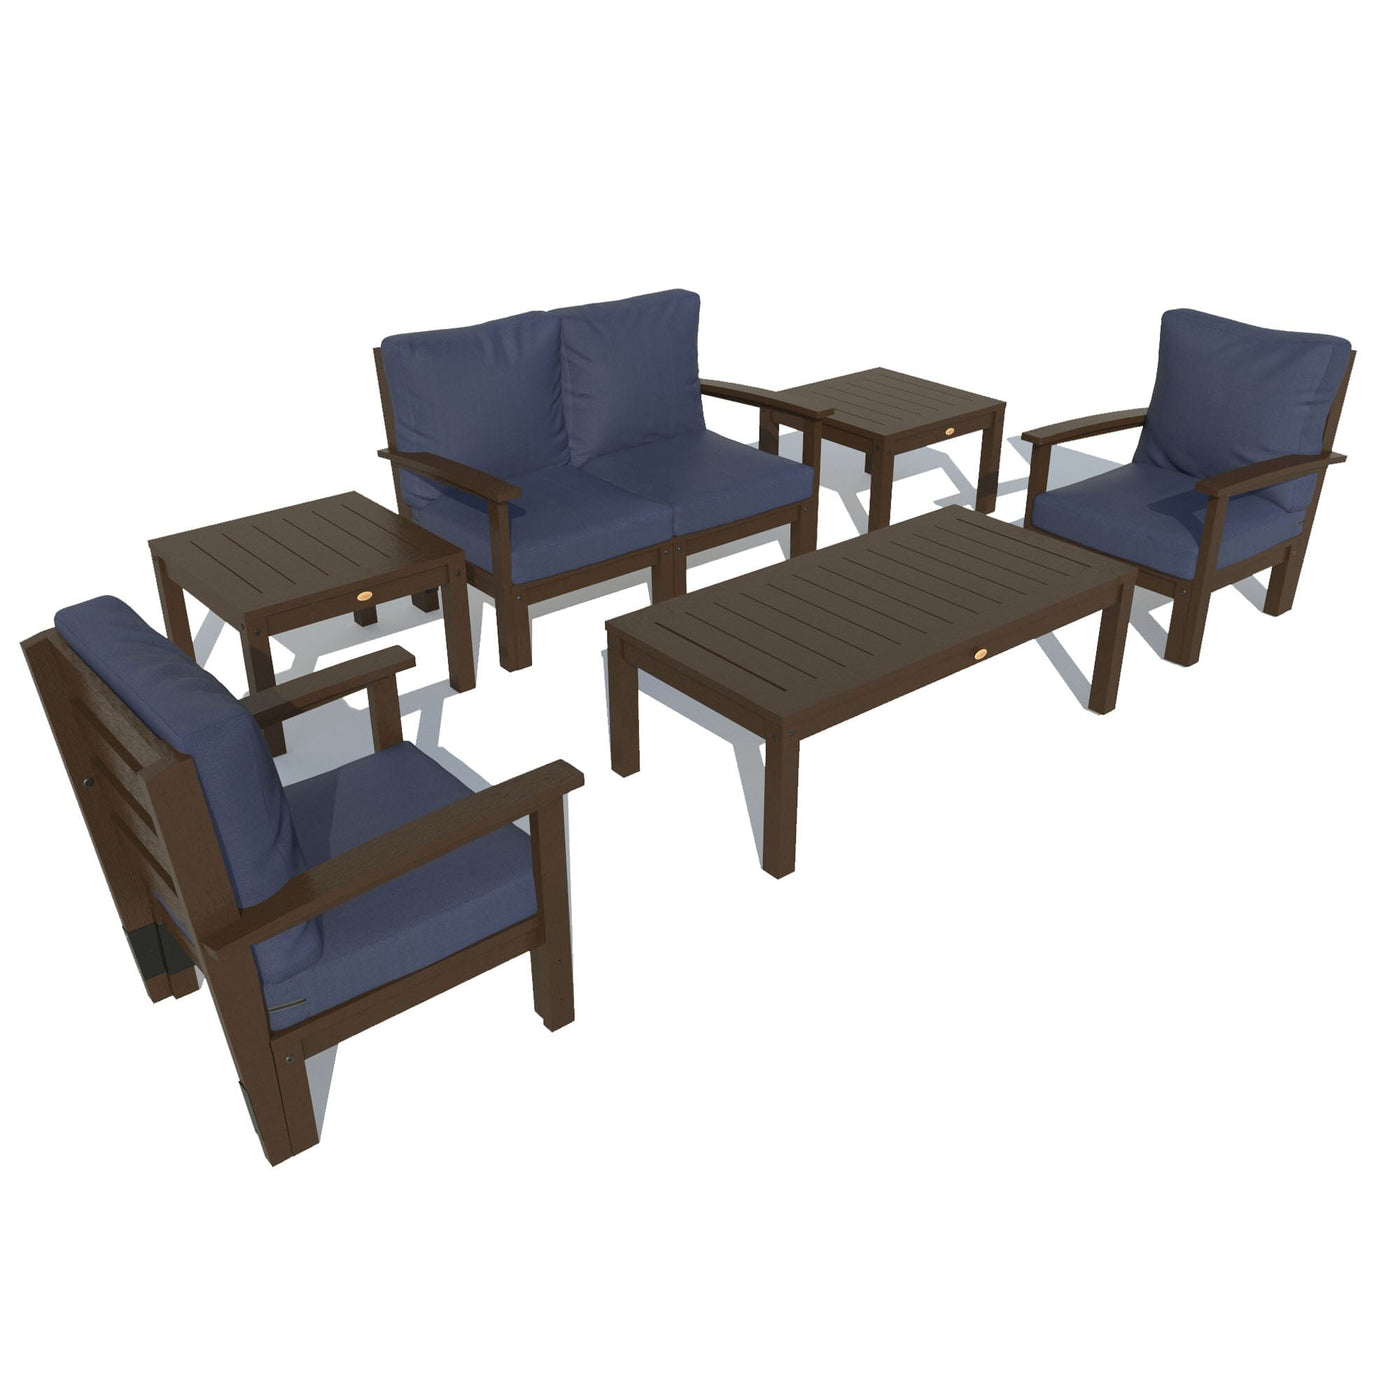 Bespoke Deep Seating: Loveseat, Set of 2 Chairs, Conversation Table, and 2 Side Tables Deep Seating Highwood USA Navy Weathered Acorn 